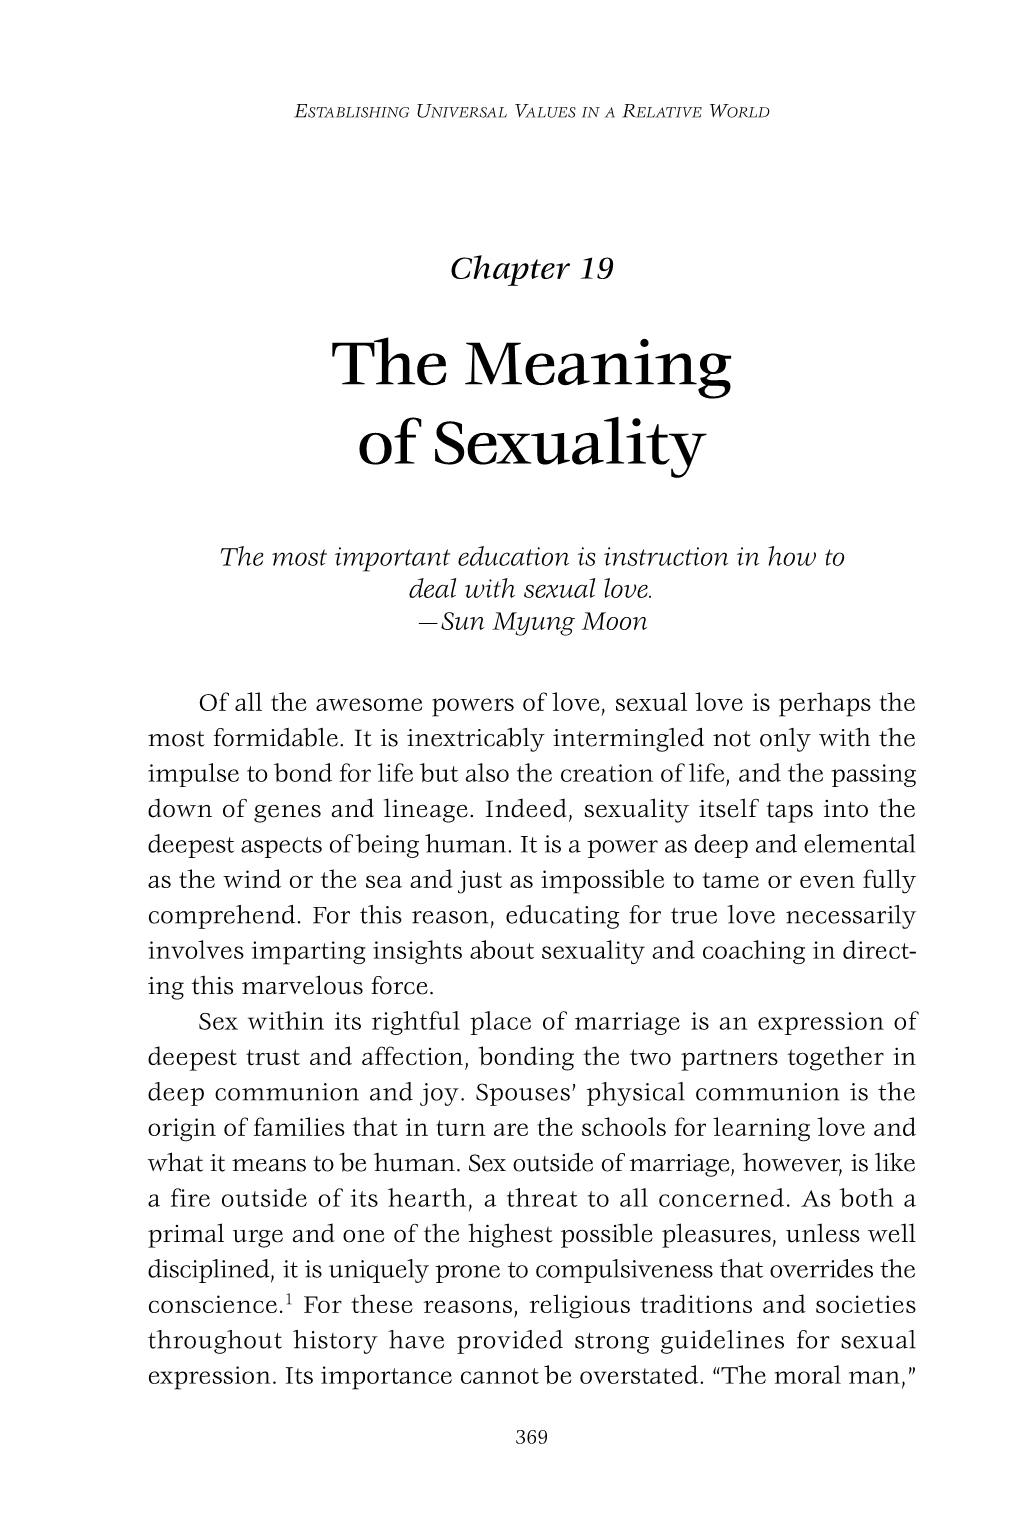 The Meaning of Sexuality